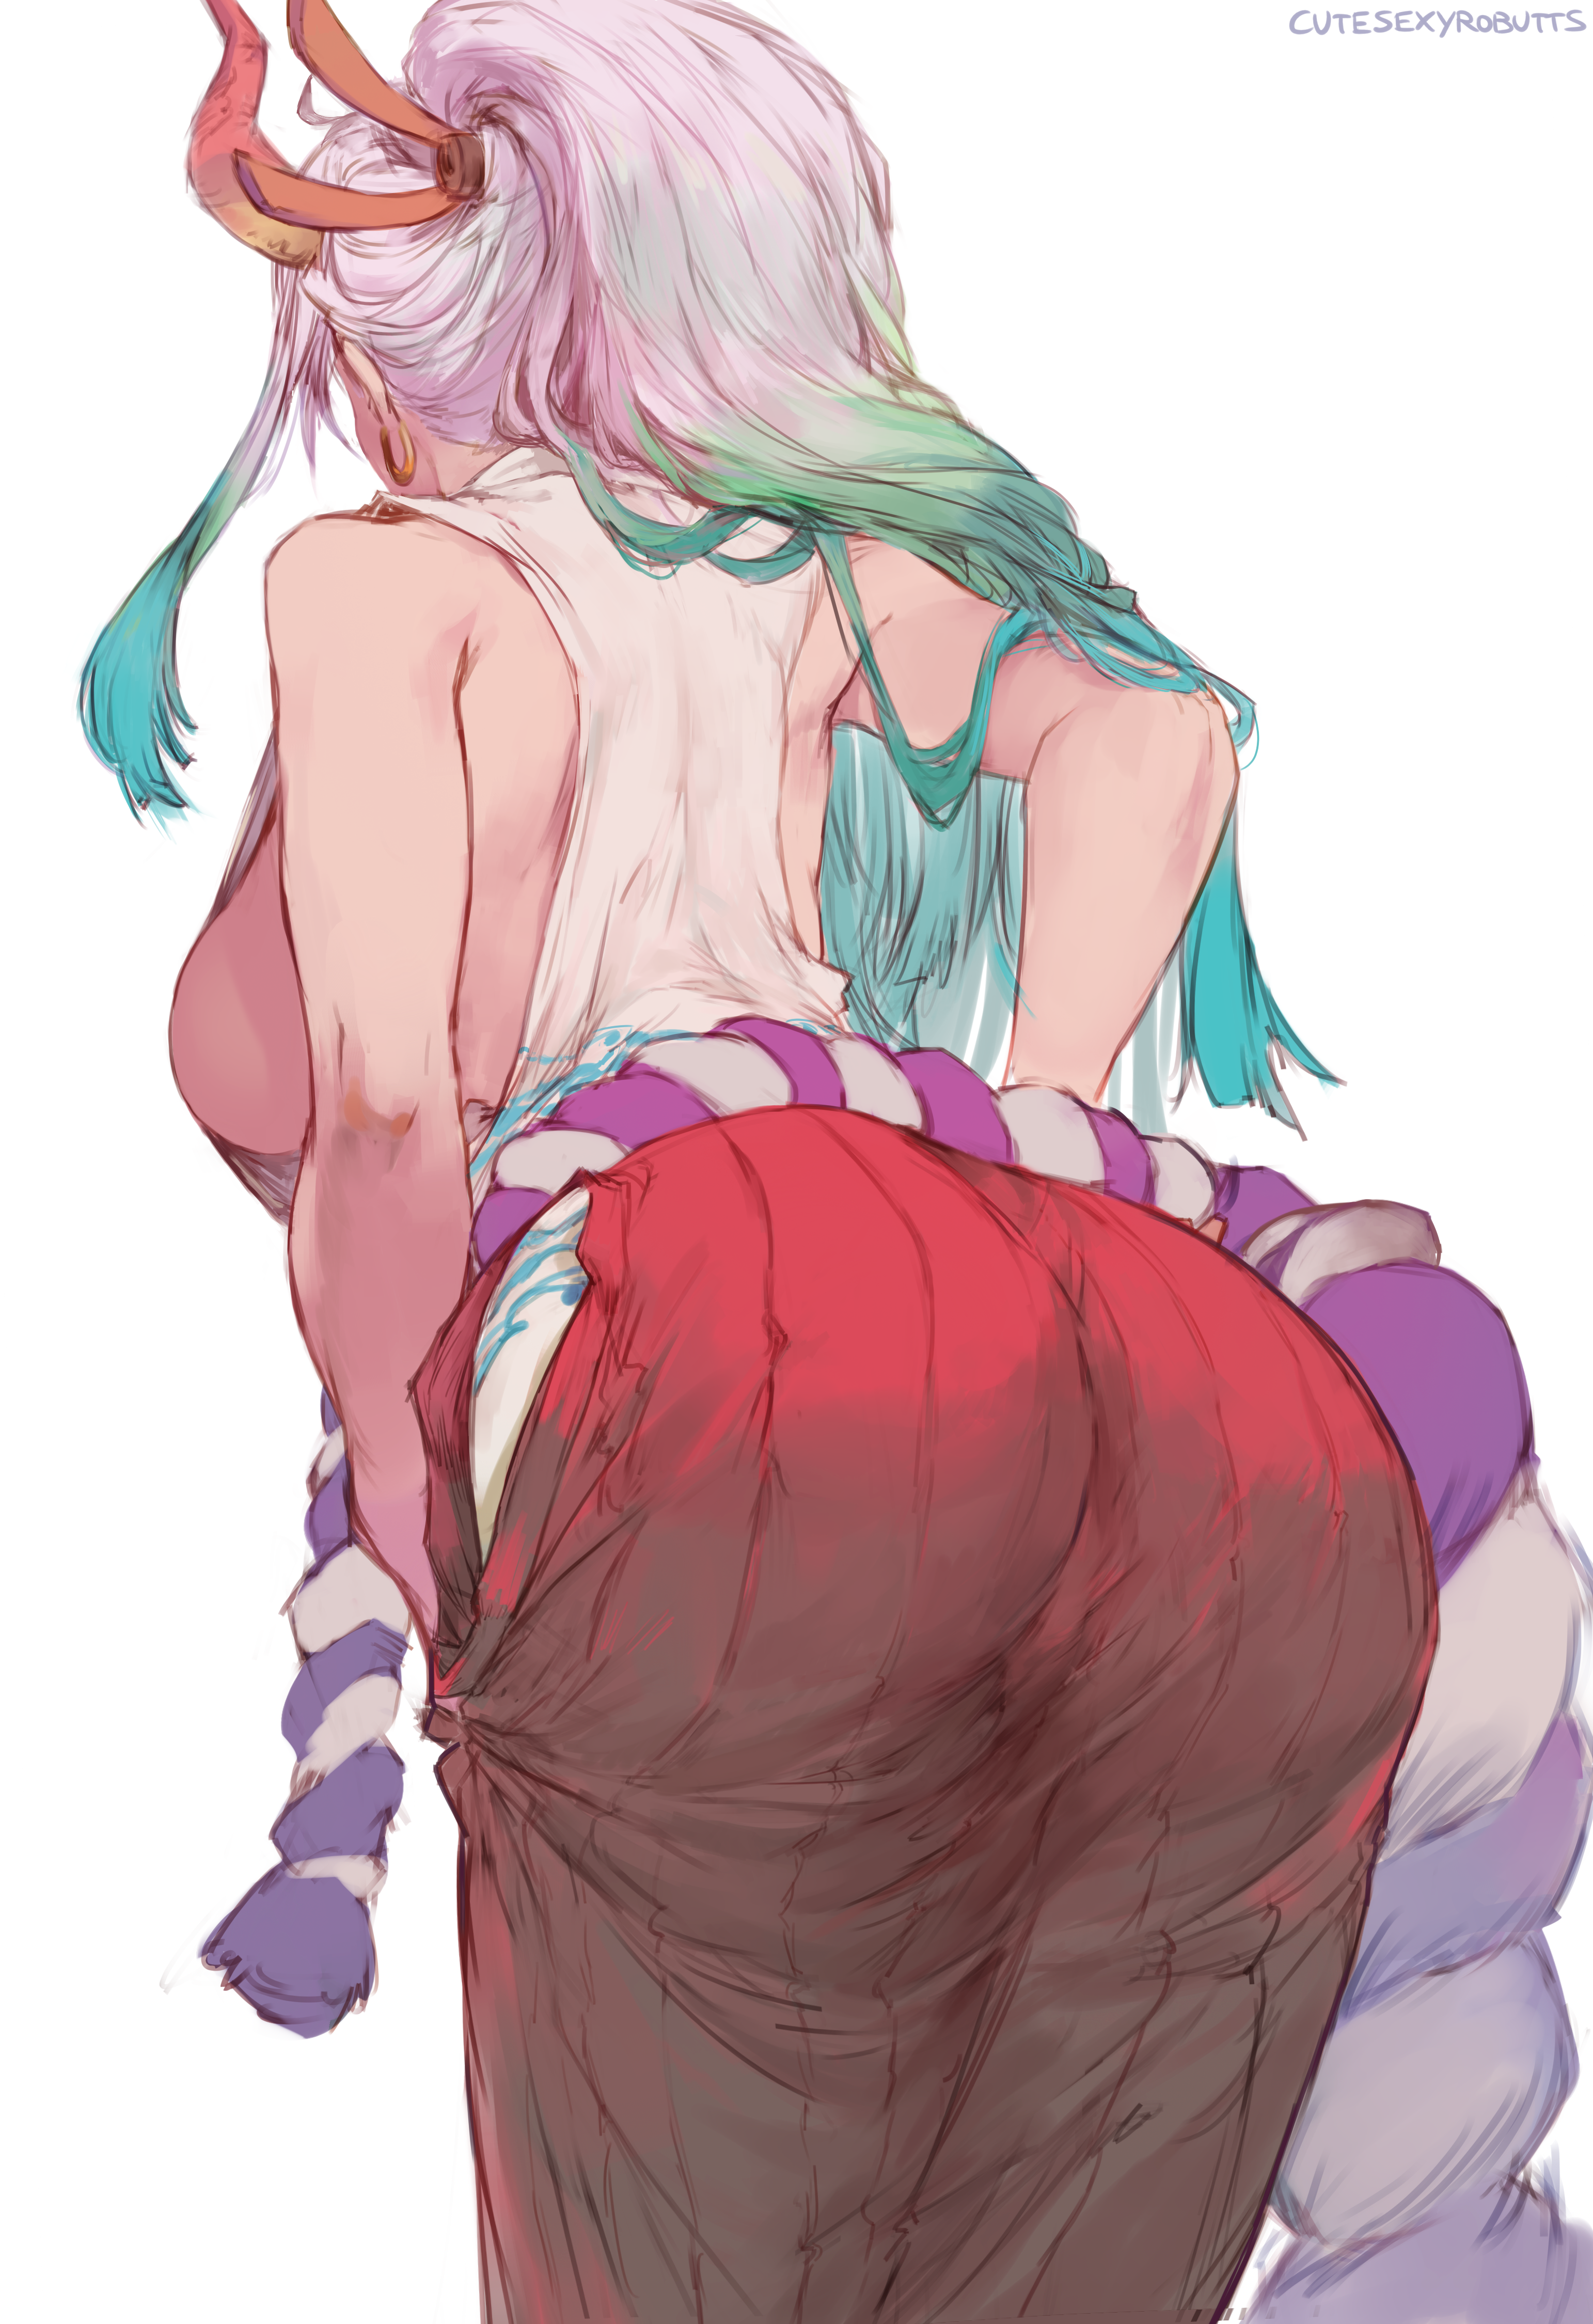 Anime 3085x4500 Yamato (One Piece) One Piece anime anime girls fantasy girl horns ponytail gradient hair behind ass curvy sideboob simple background white background portrait display 2D artwork drawing digital art illustration fan art Cutesexyrobutts